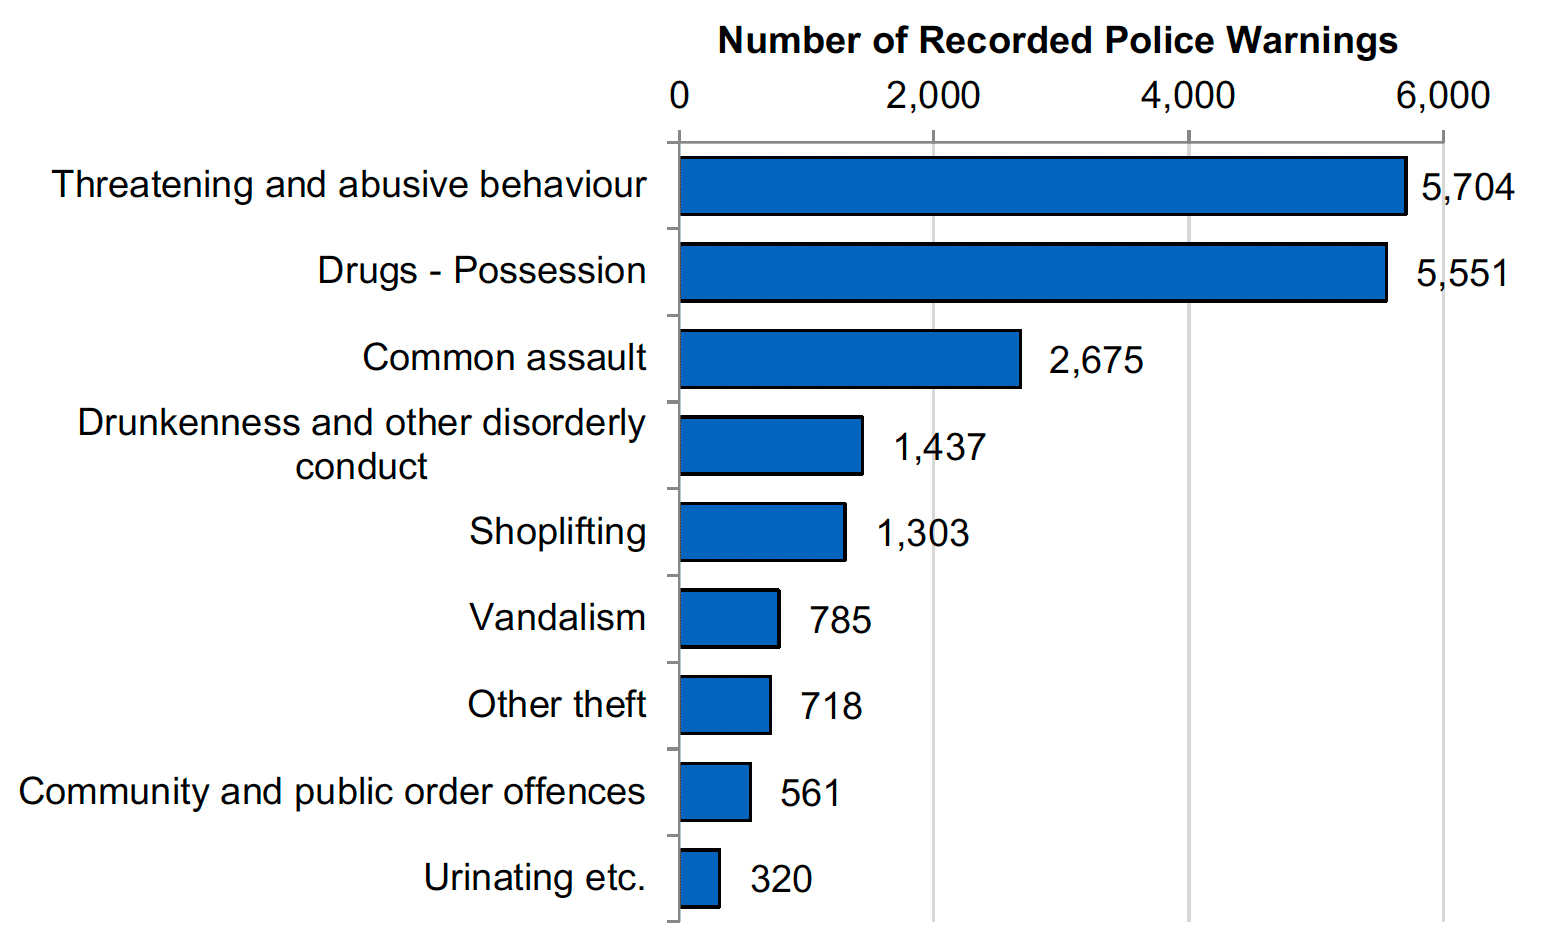 Bar chart showing the most common offences for Recorded Police Warnings in 2021-22, the highest being for Threatening and abusive behaviour (5,704) and Drugs - Possession (5,551).